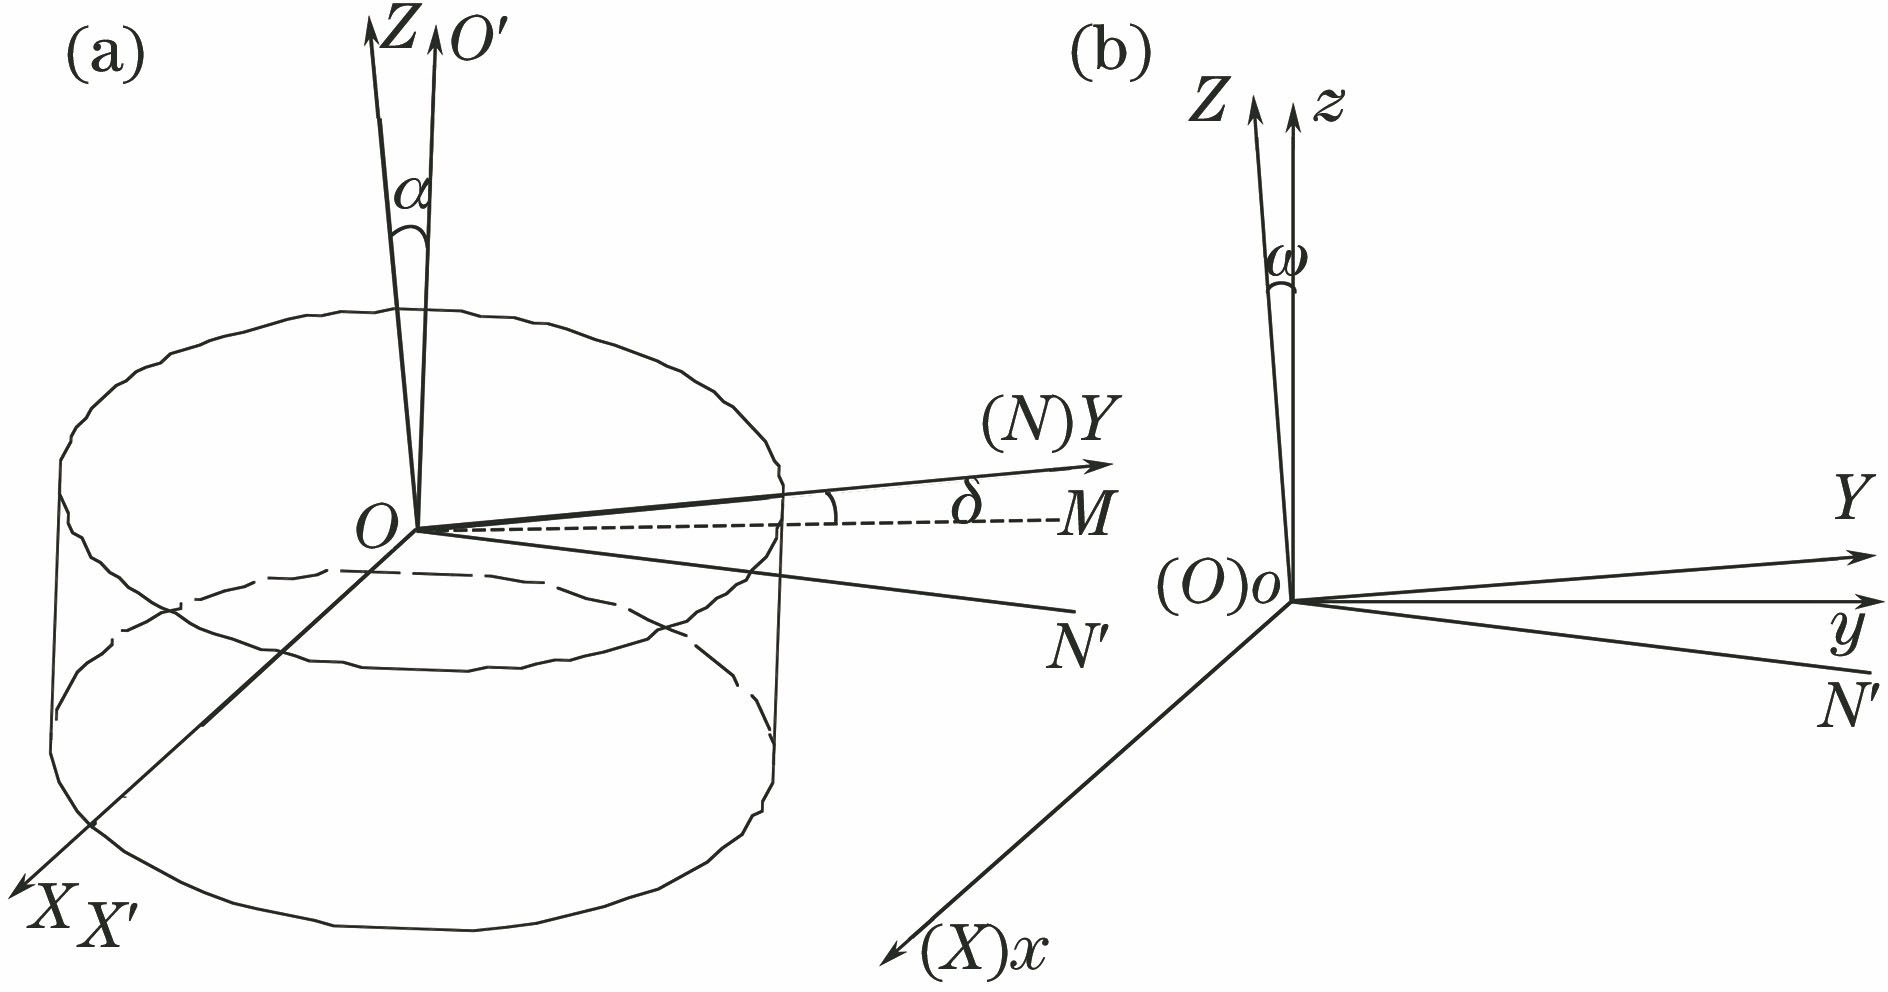 (a) Relative position relationship between encoder and plane mirror coordinate system; (b) relative position relationship between plane mirror coordinate system and theodolite coordinate system